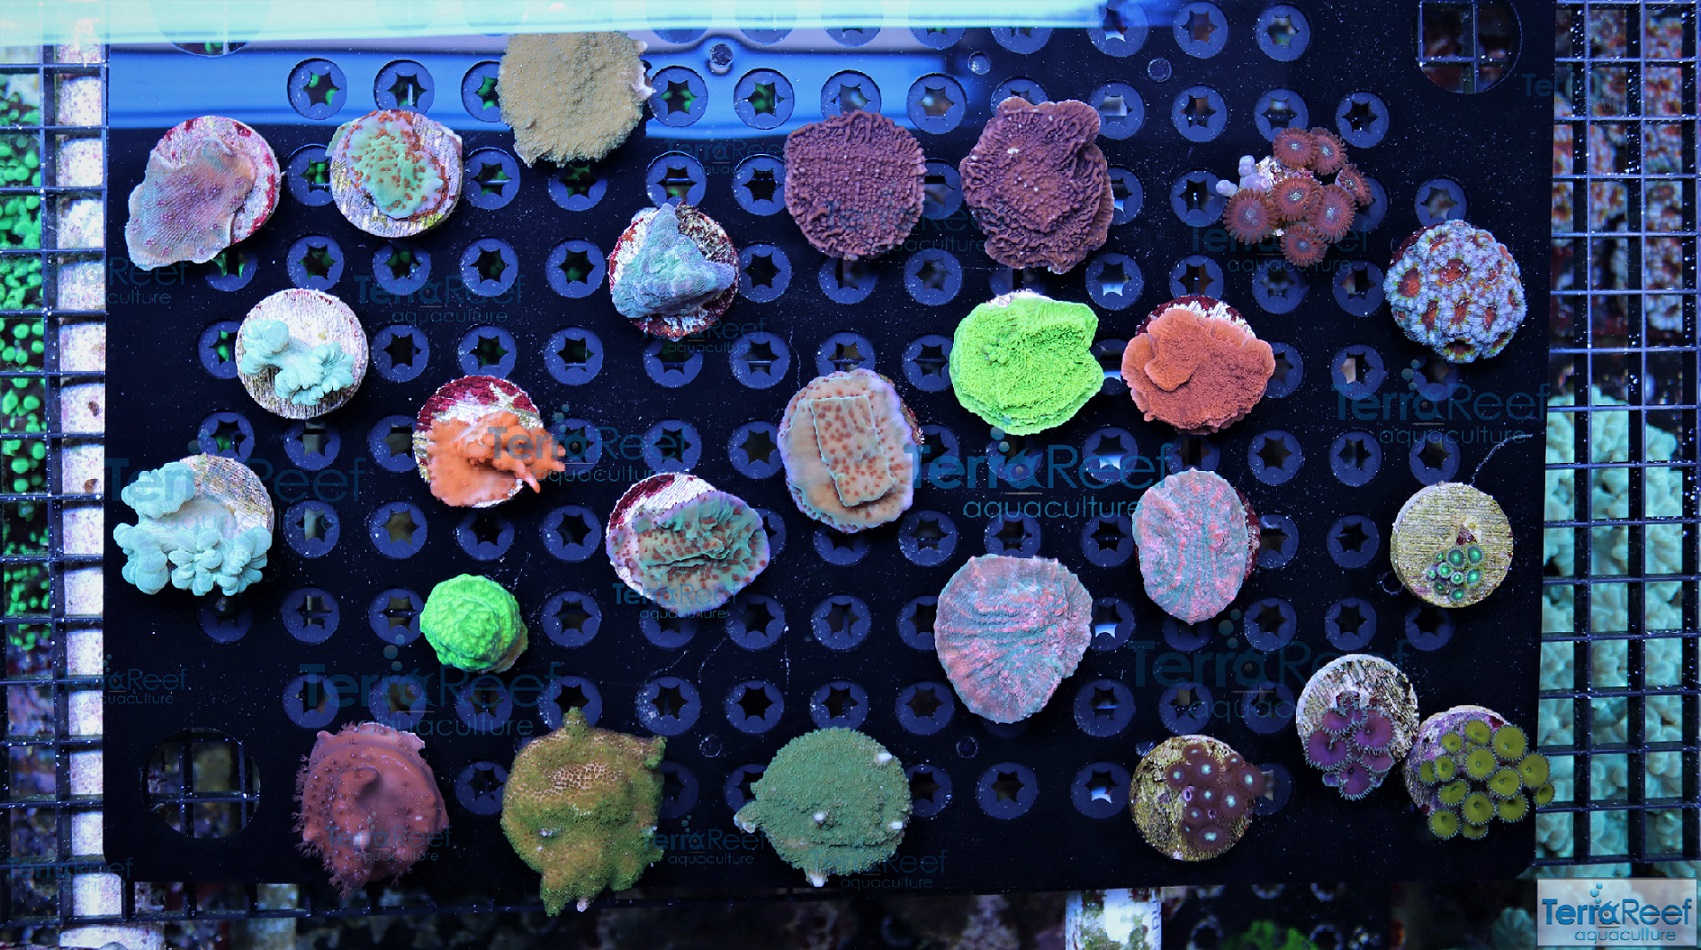 IMG_6380-Aquacultured-Coral-Frags-Quarentined-Small.jpg